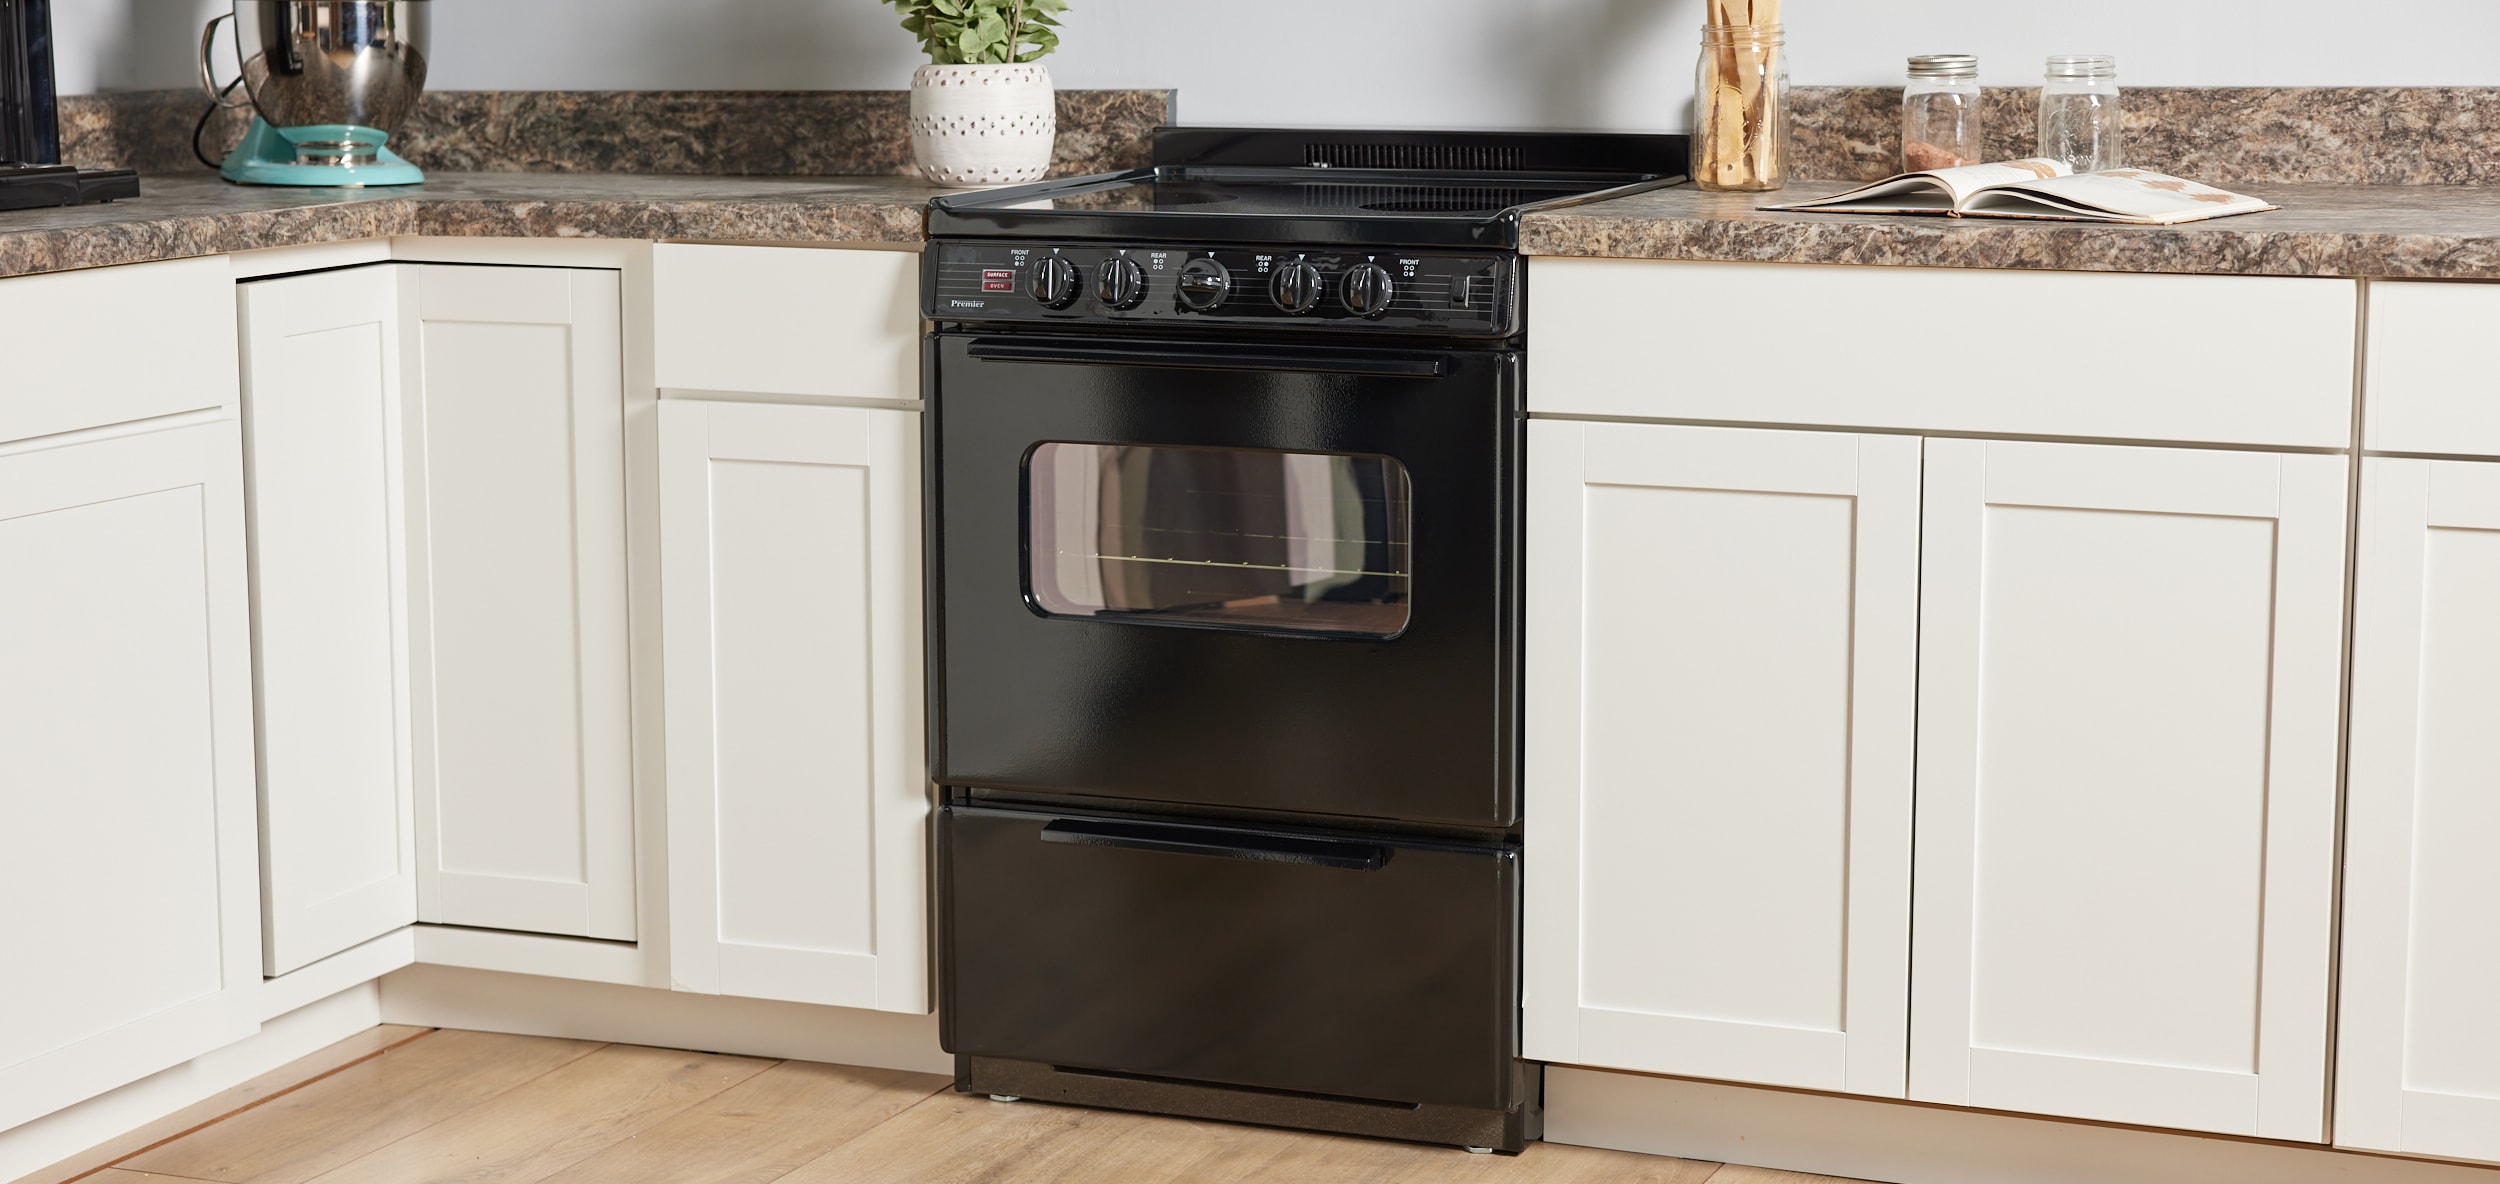 Premier 24-in Glass Top 4 Elements 2.9-cu ft Freestanding Electric Range  (White On White) at